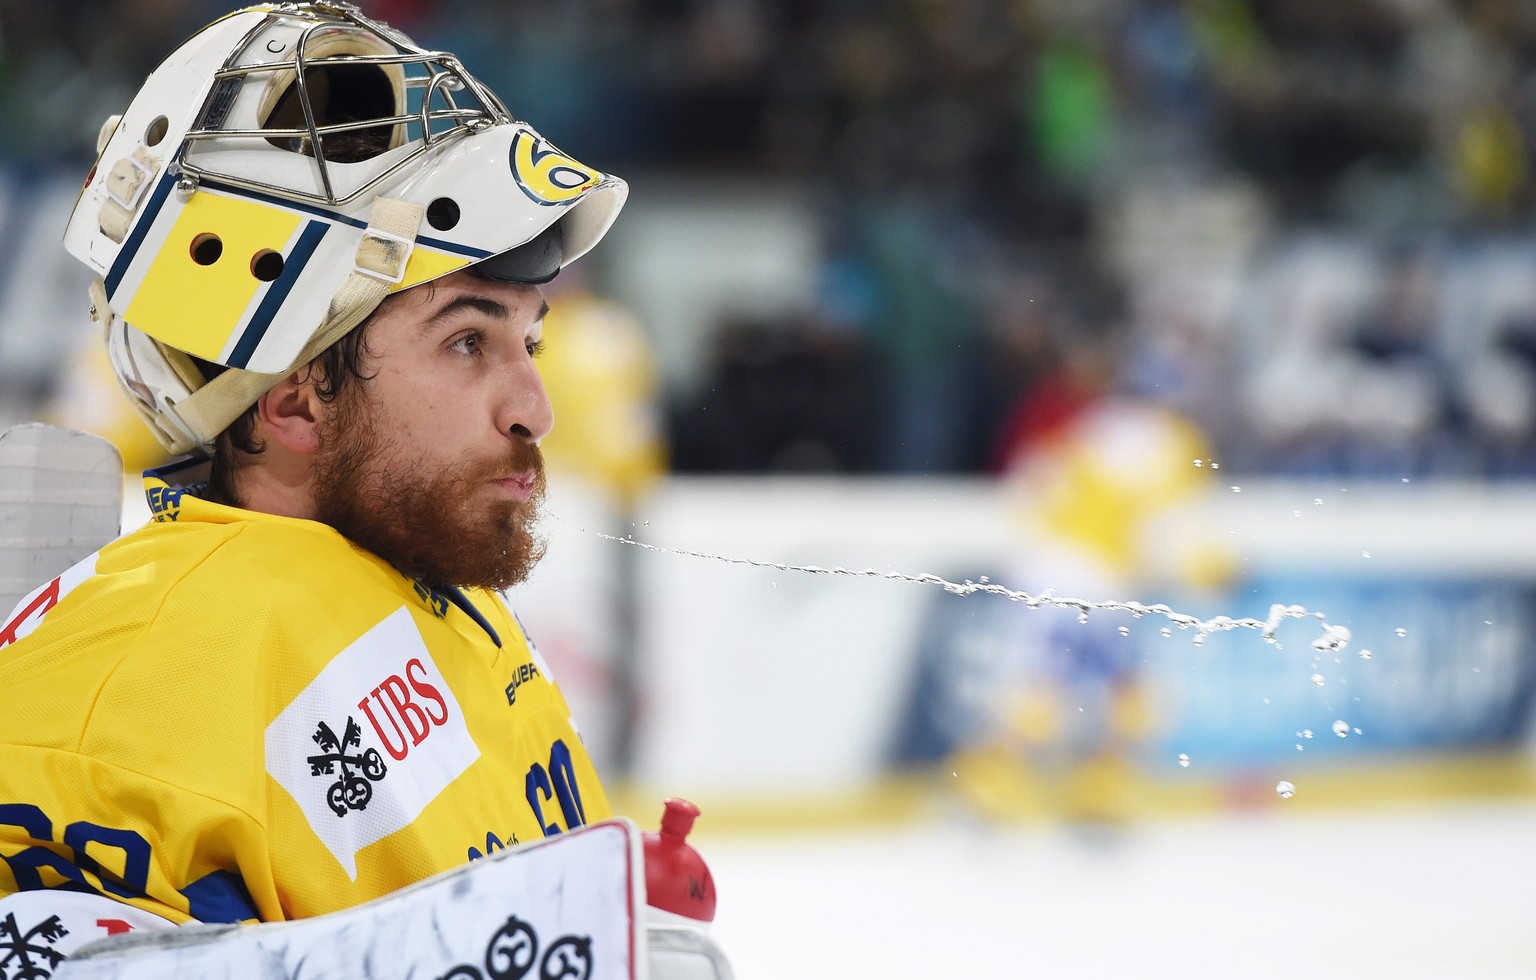 epa05690348 Davos goalkeeper Melvin Nyffeler during the game between HK Dinamo Minsk and Switzerlands HC Davos at the 90th Spengler Cup ice hockey tournament in Davos, Switzerland, 28 December 2016. E ...